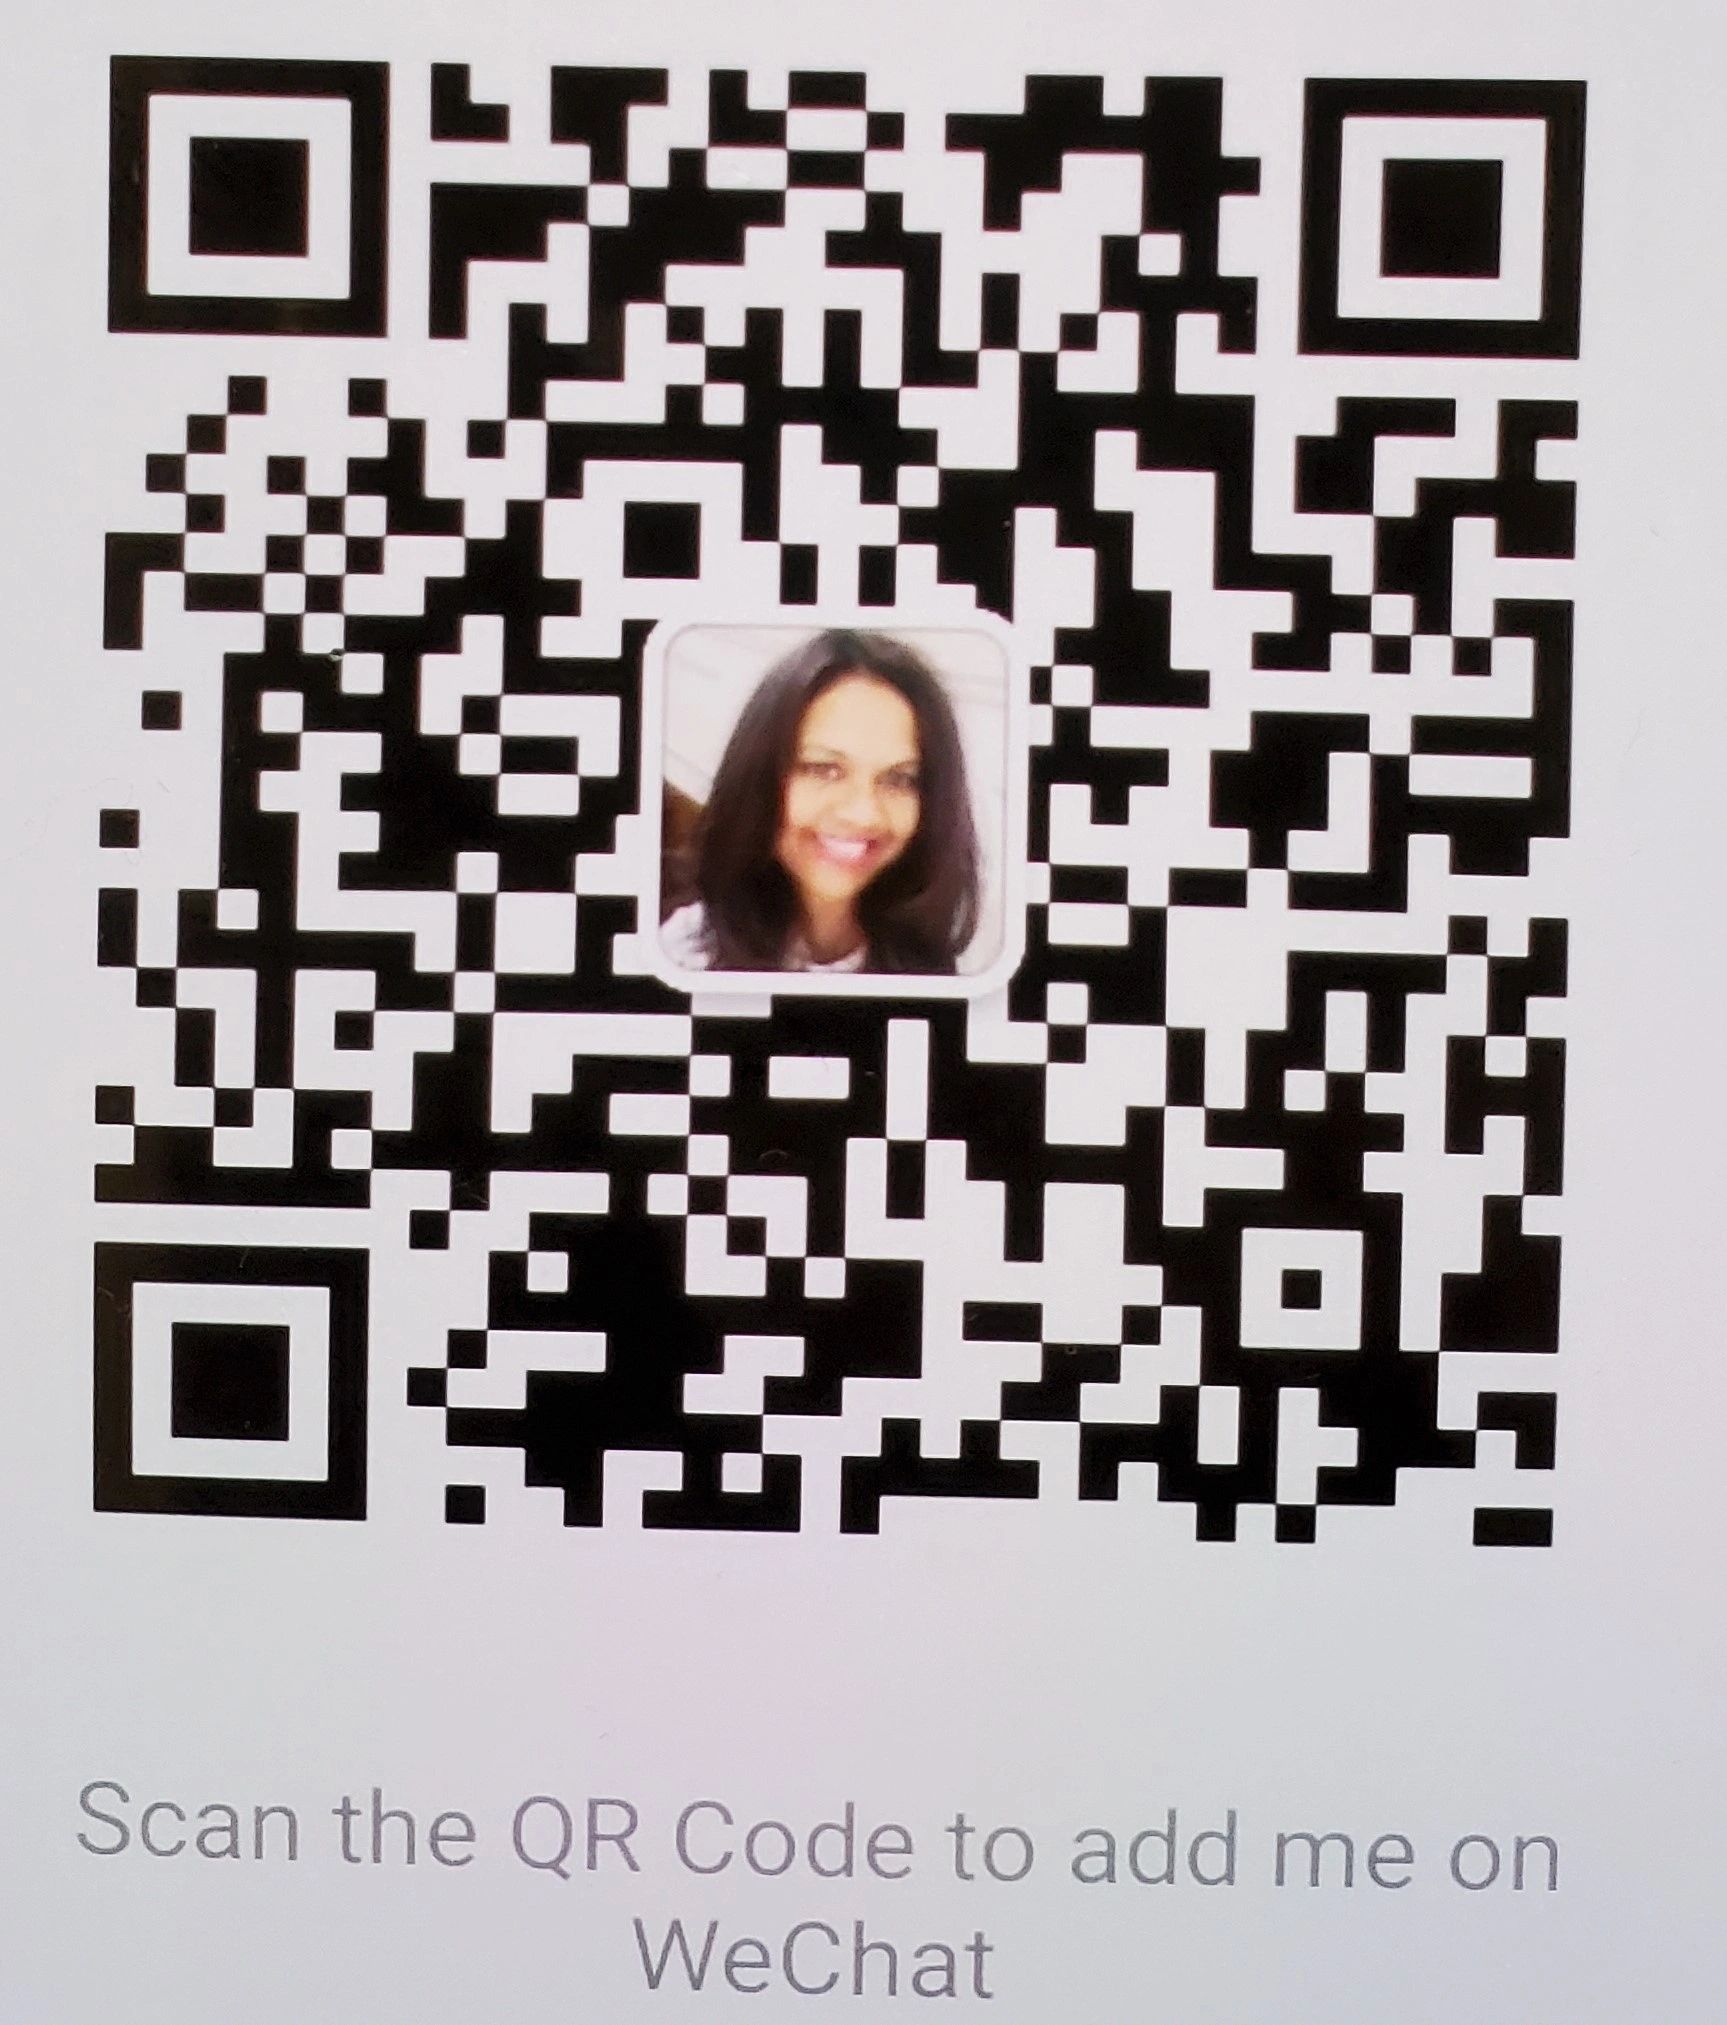 Scan the QR Code to add me on WeChat